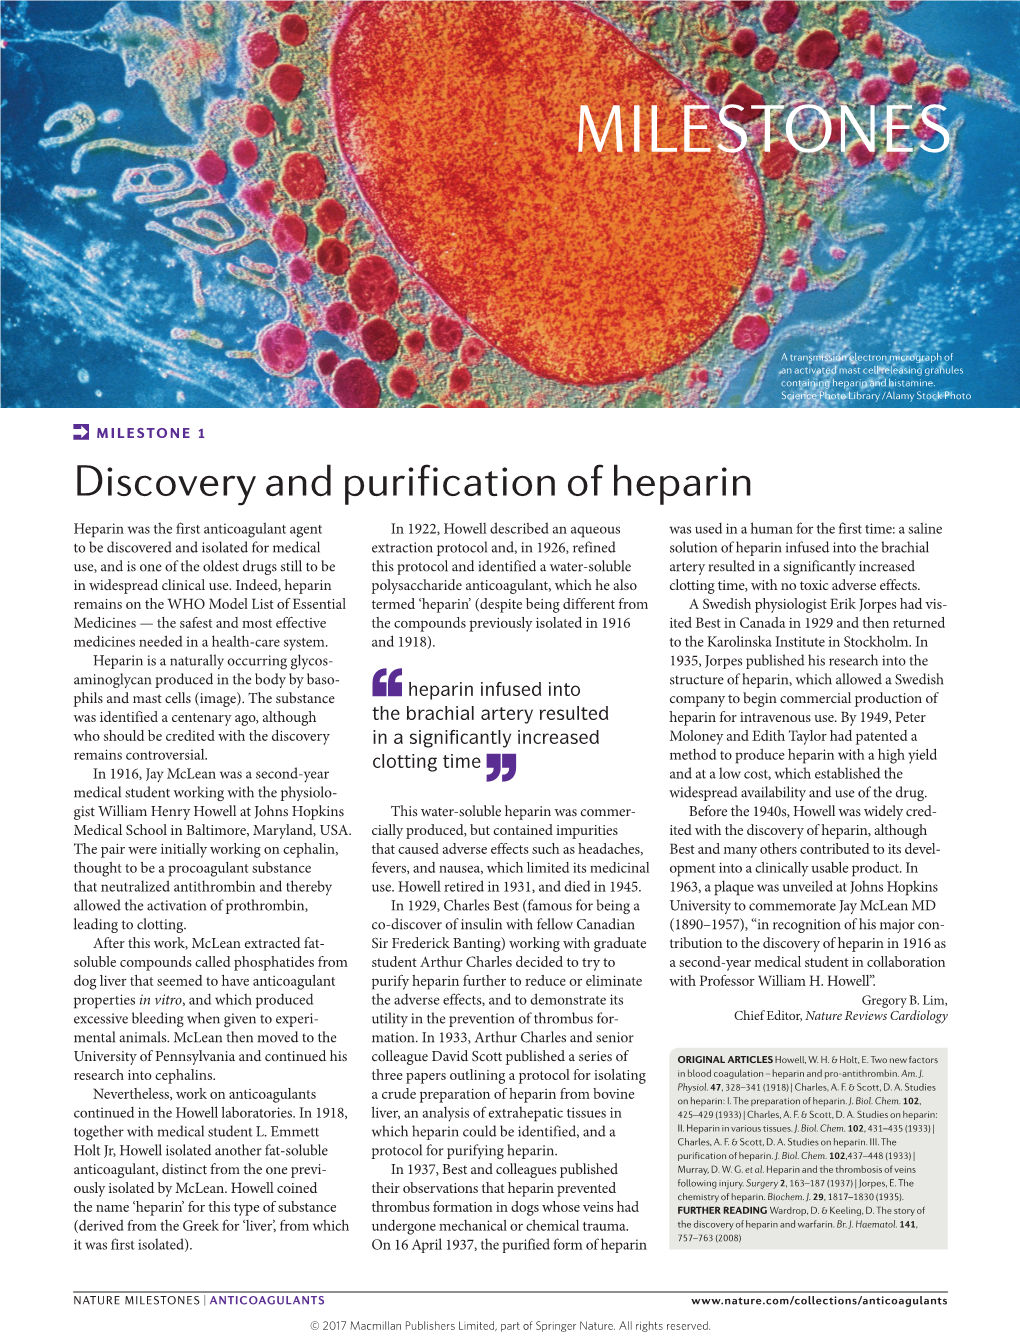 Discovery and Purification of Heparin